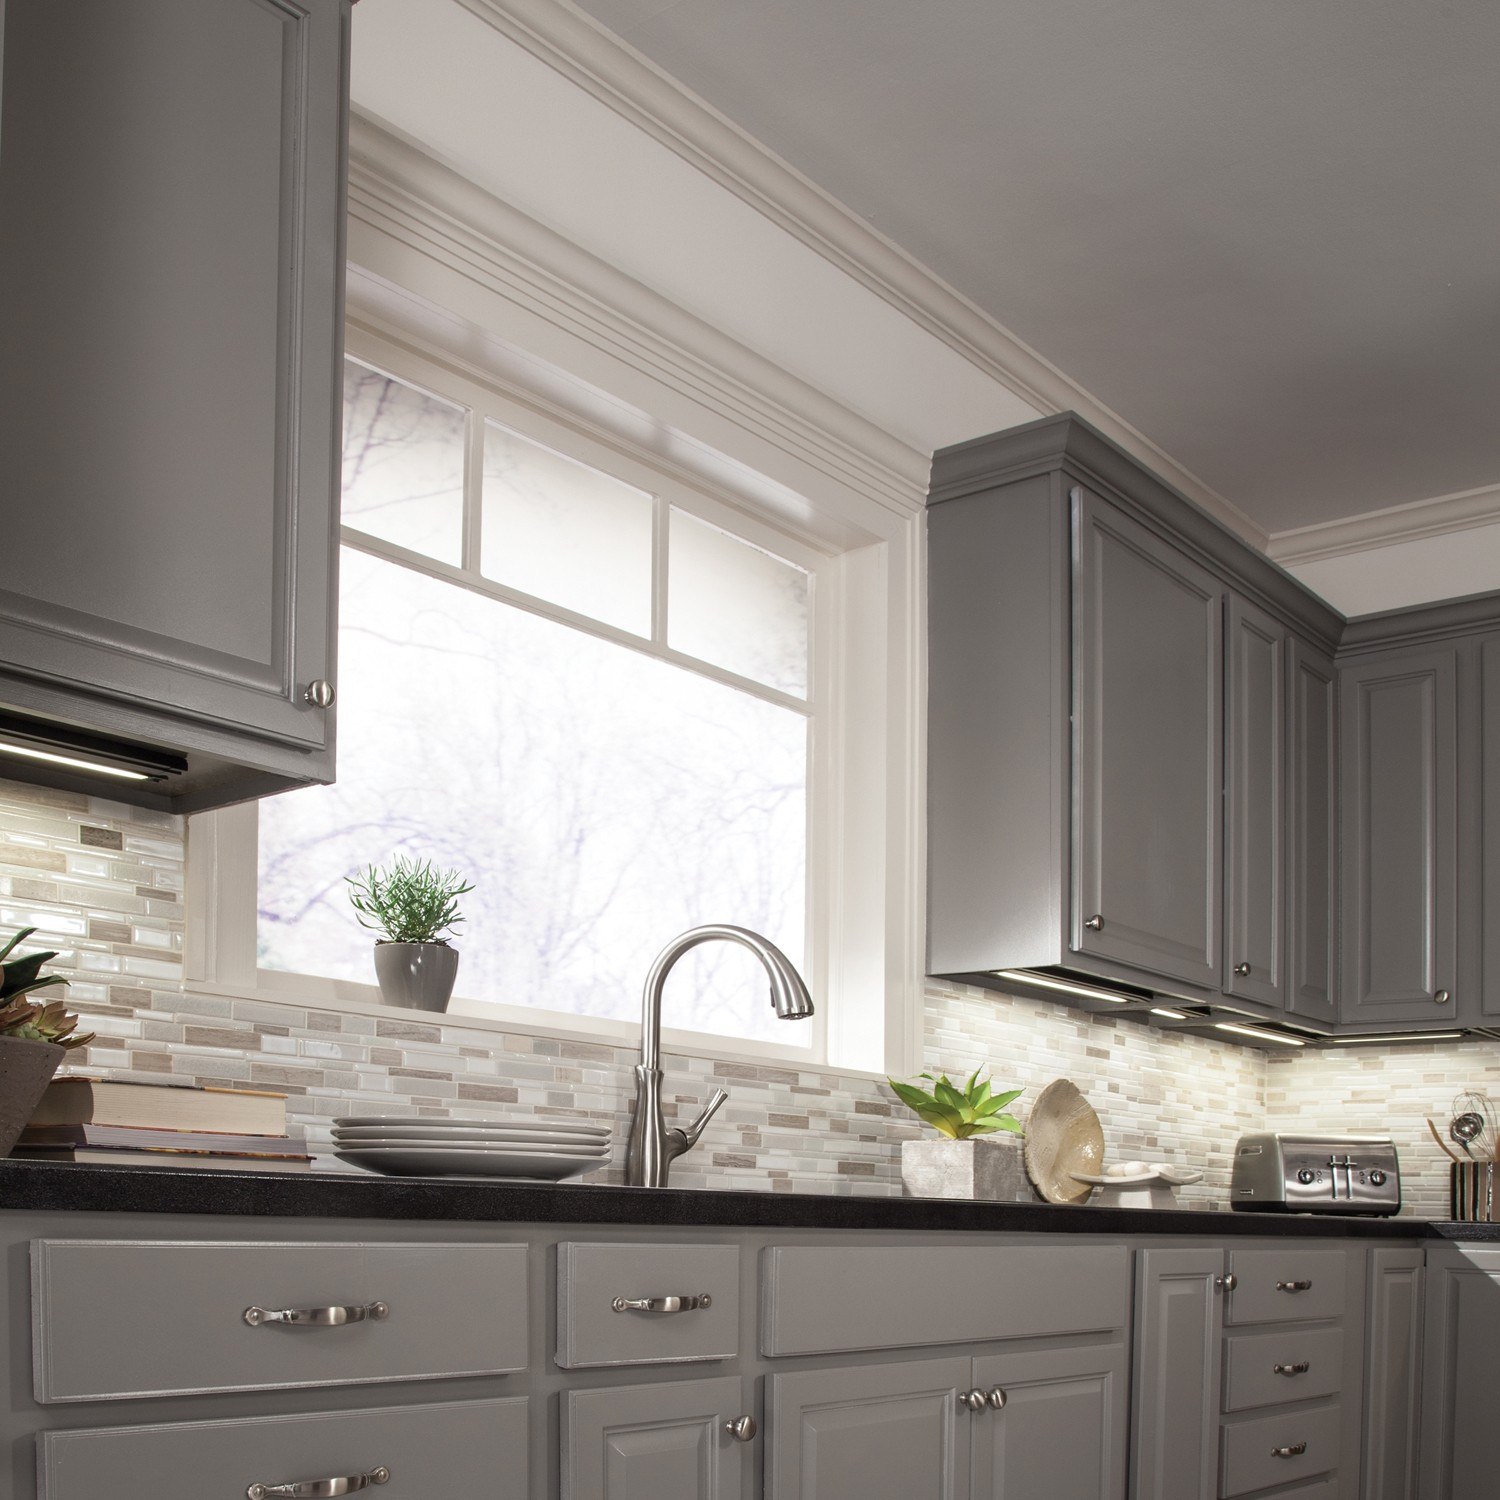 Under Cabinet Lighting For Kitchen
 How To Light A Kitchen For Aging Eyes